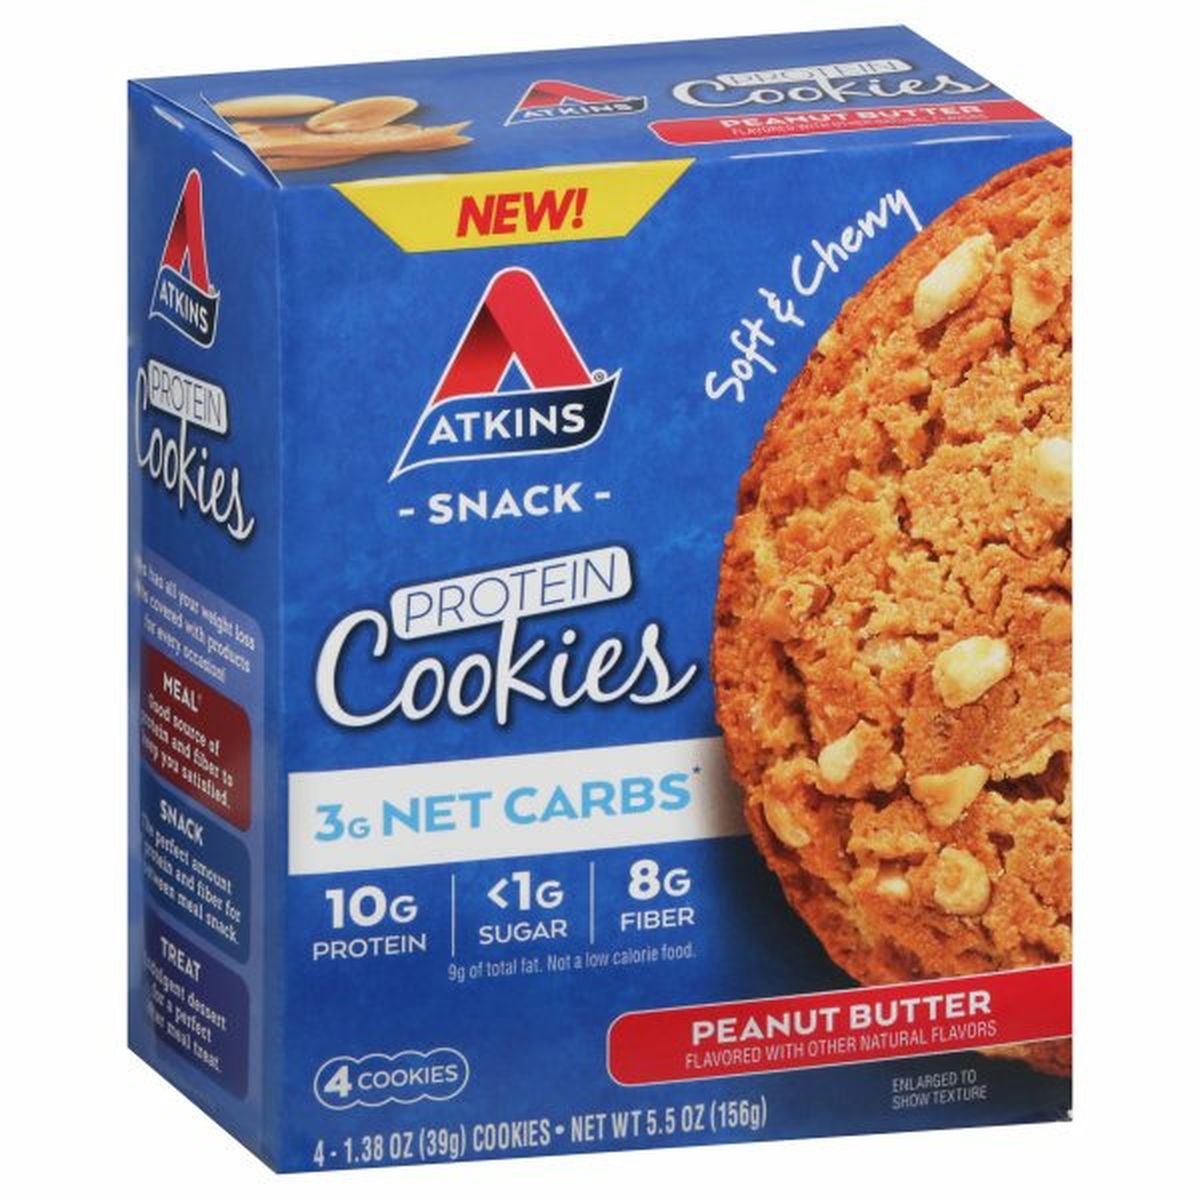 Calories in Atkins Protein Cookies, Peanut Butter